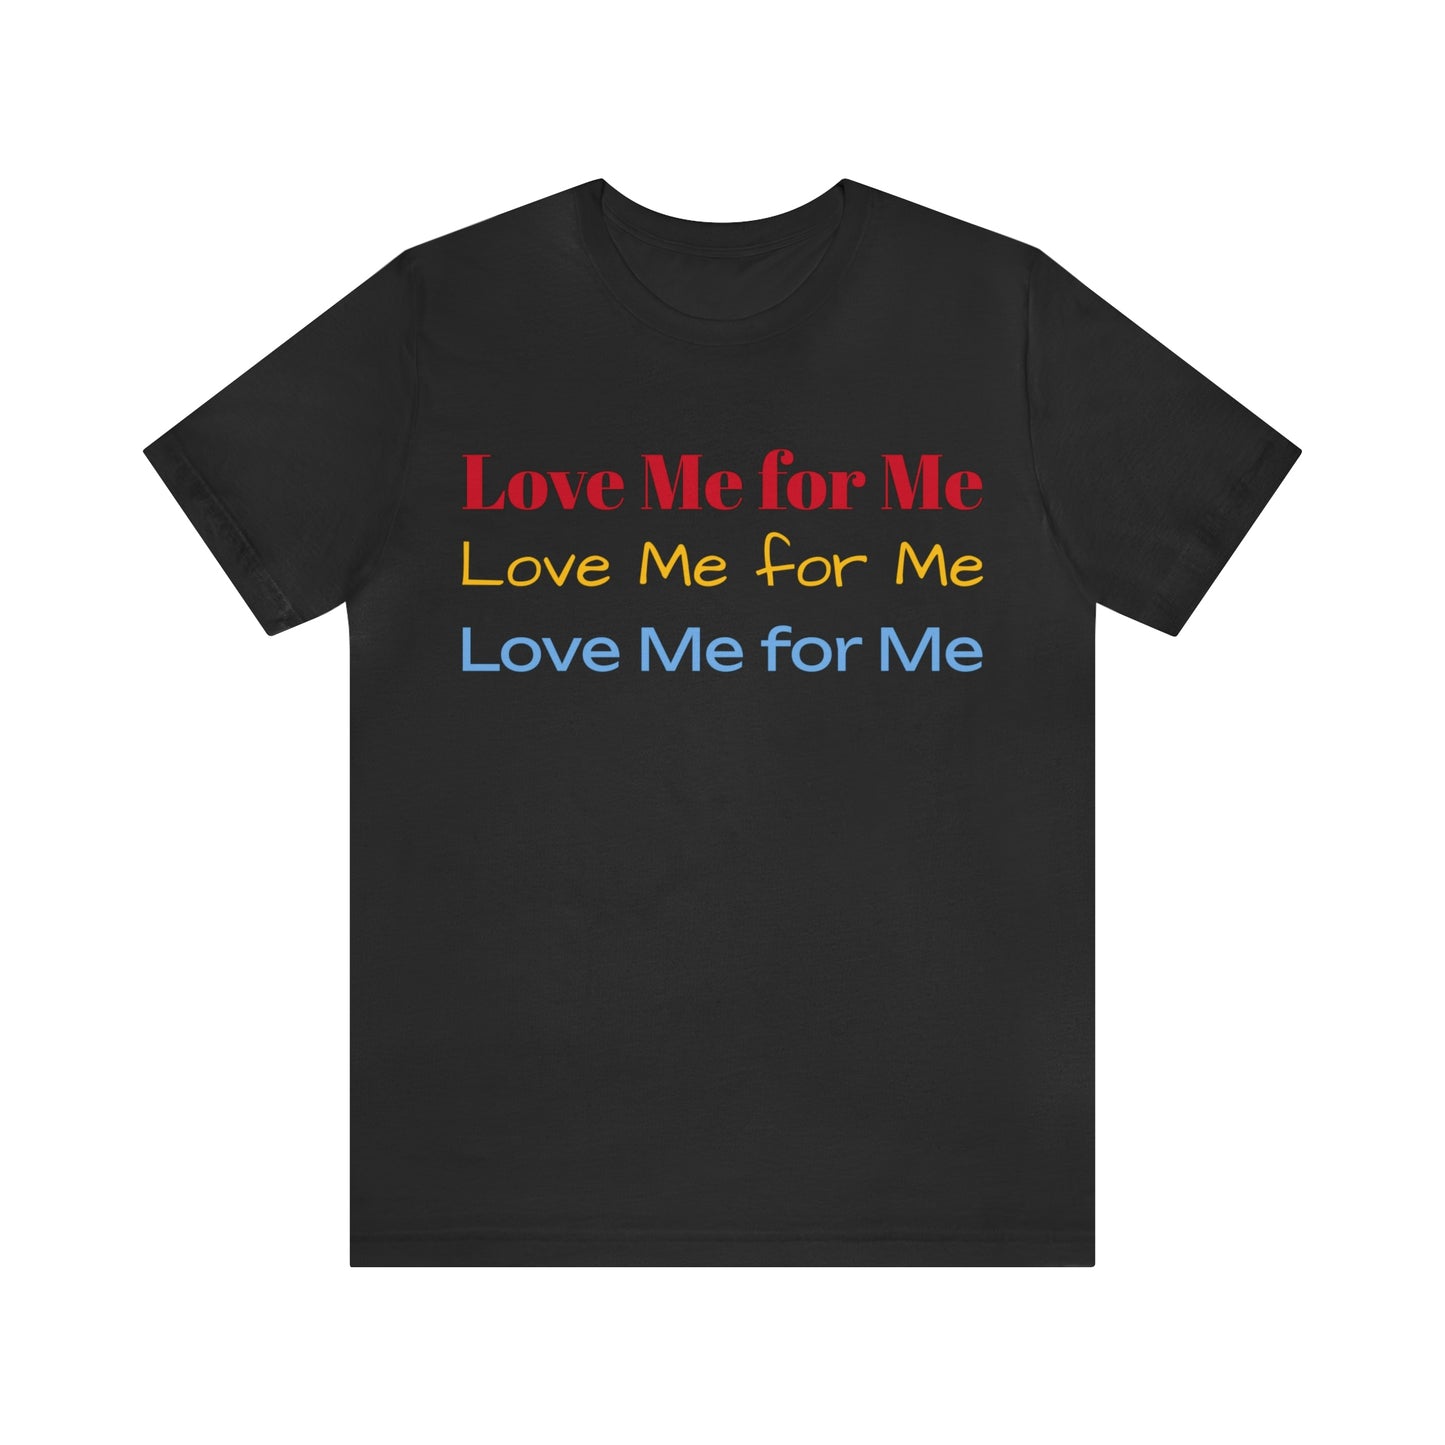 Love Me for Me